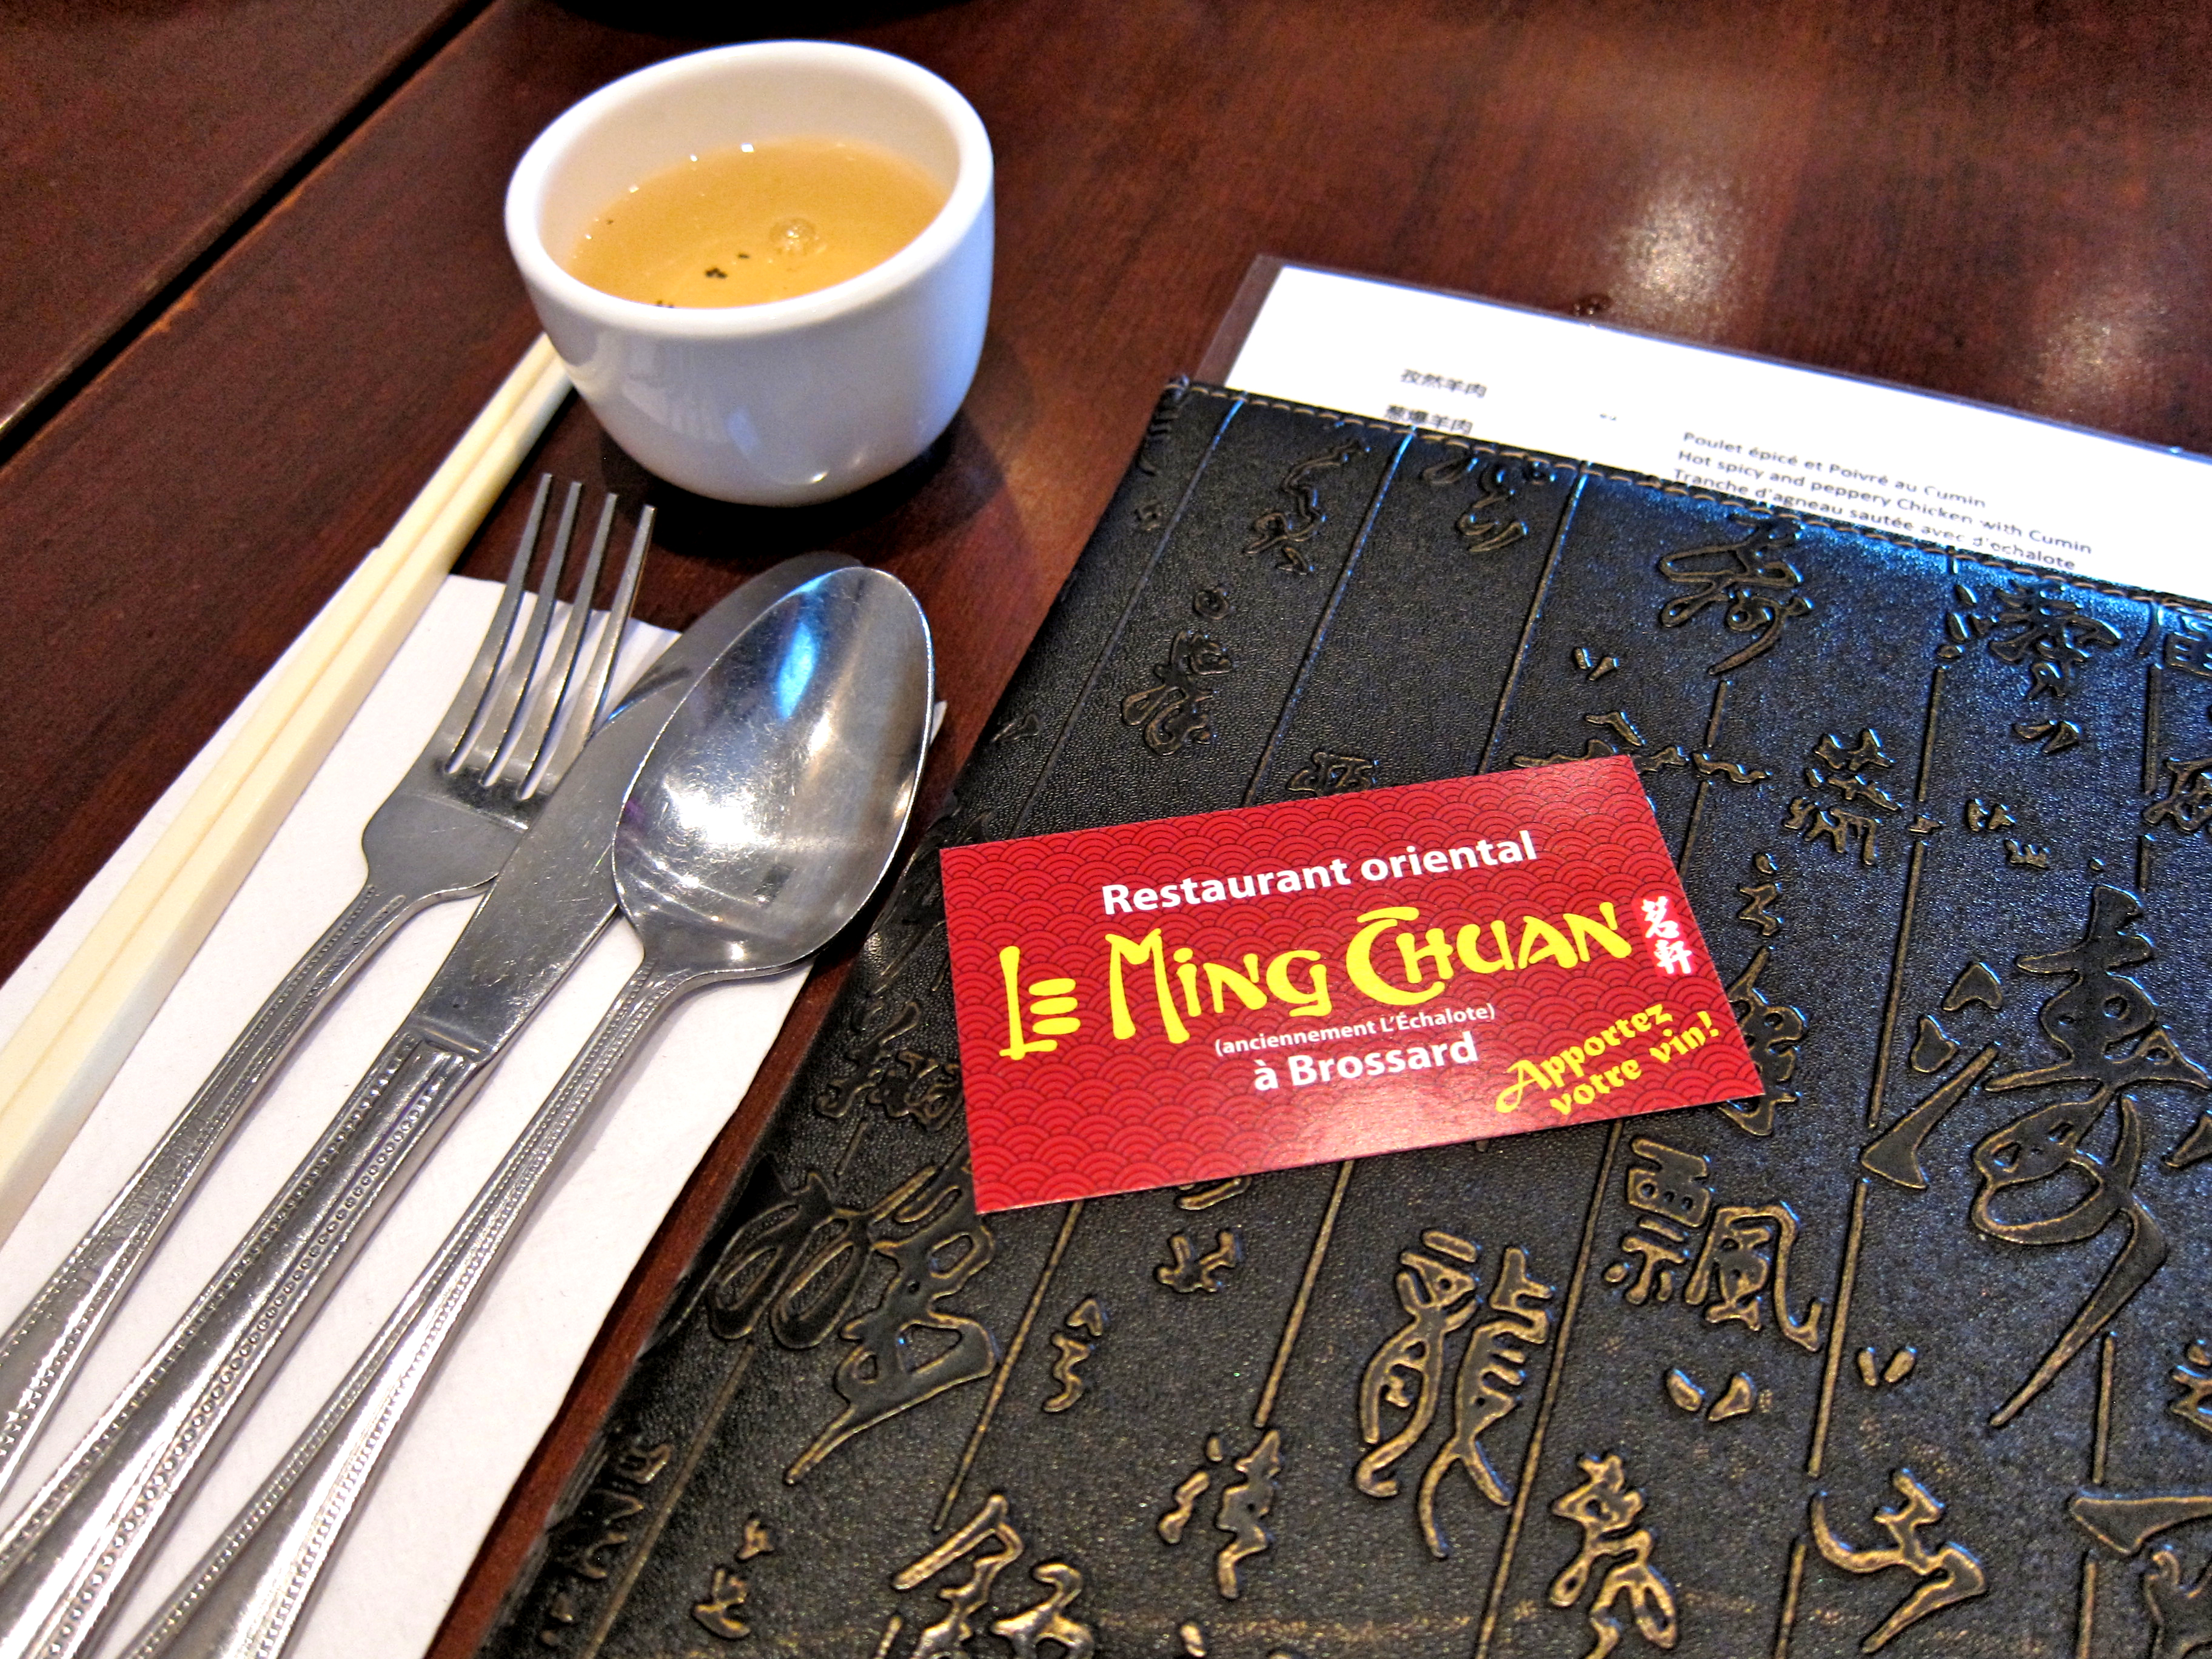 [MTL] Authentic Sichuan Food Spiced-Up in Brossard – Le Ming Chuan